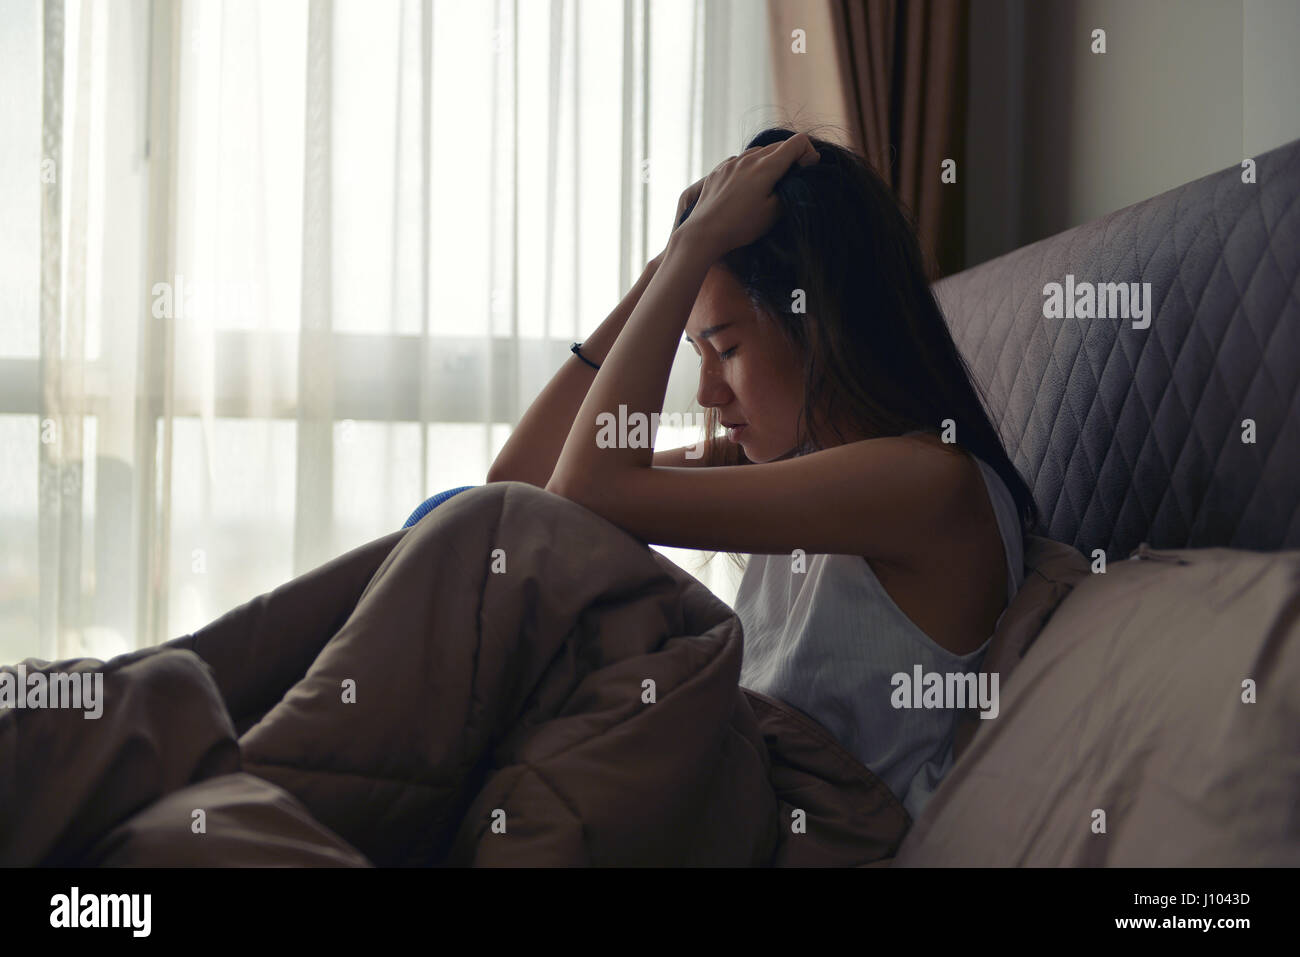 Asian Woman Suffering From Depression Sitting On Bed Stock Photo